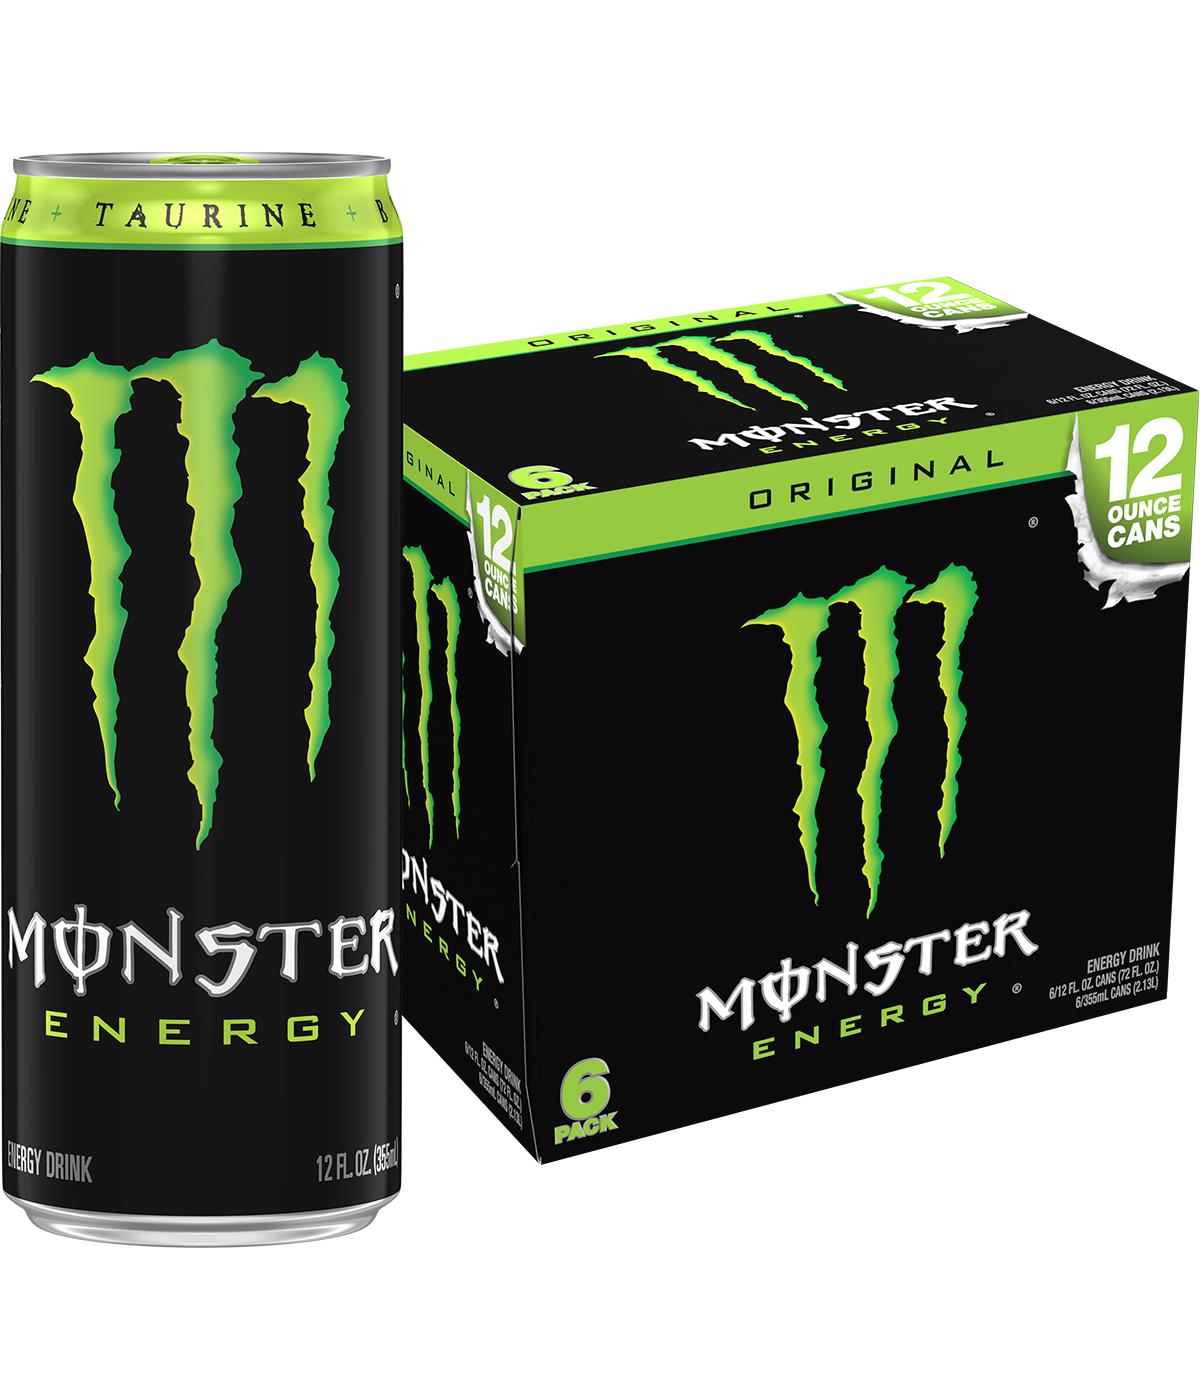 Monster Energy Original Green 12 oz Cans; image 3 of 3